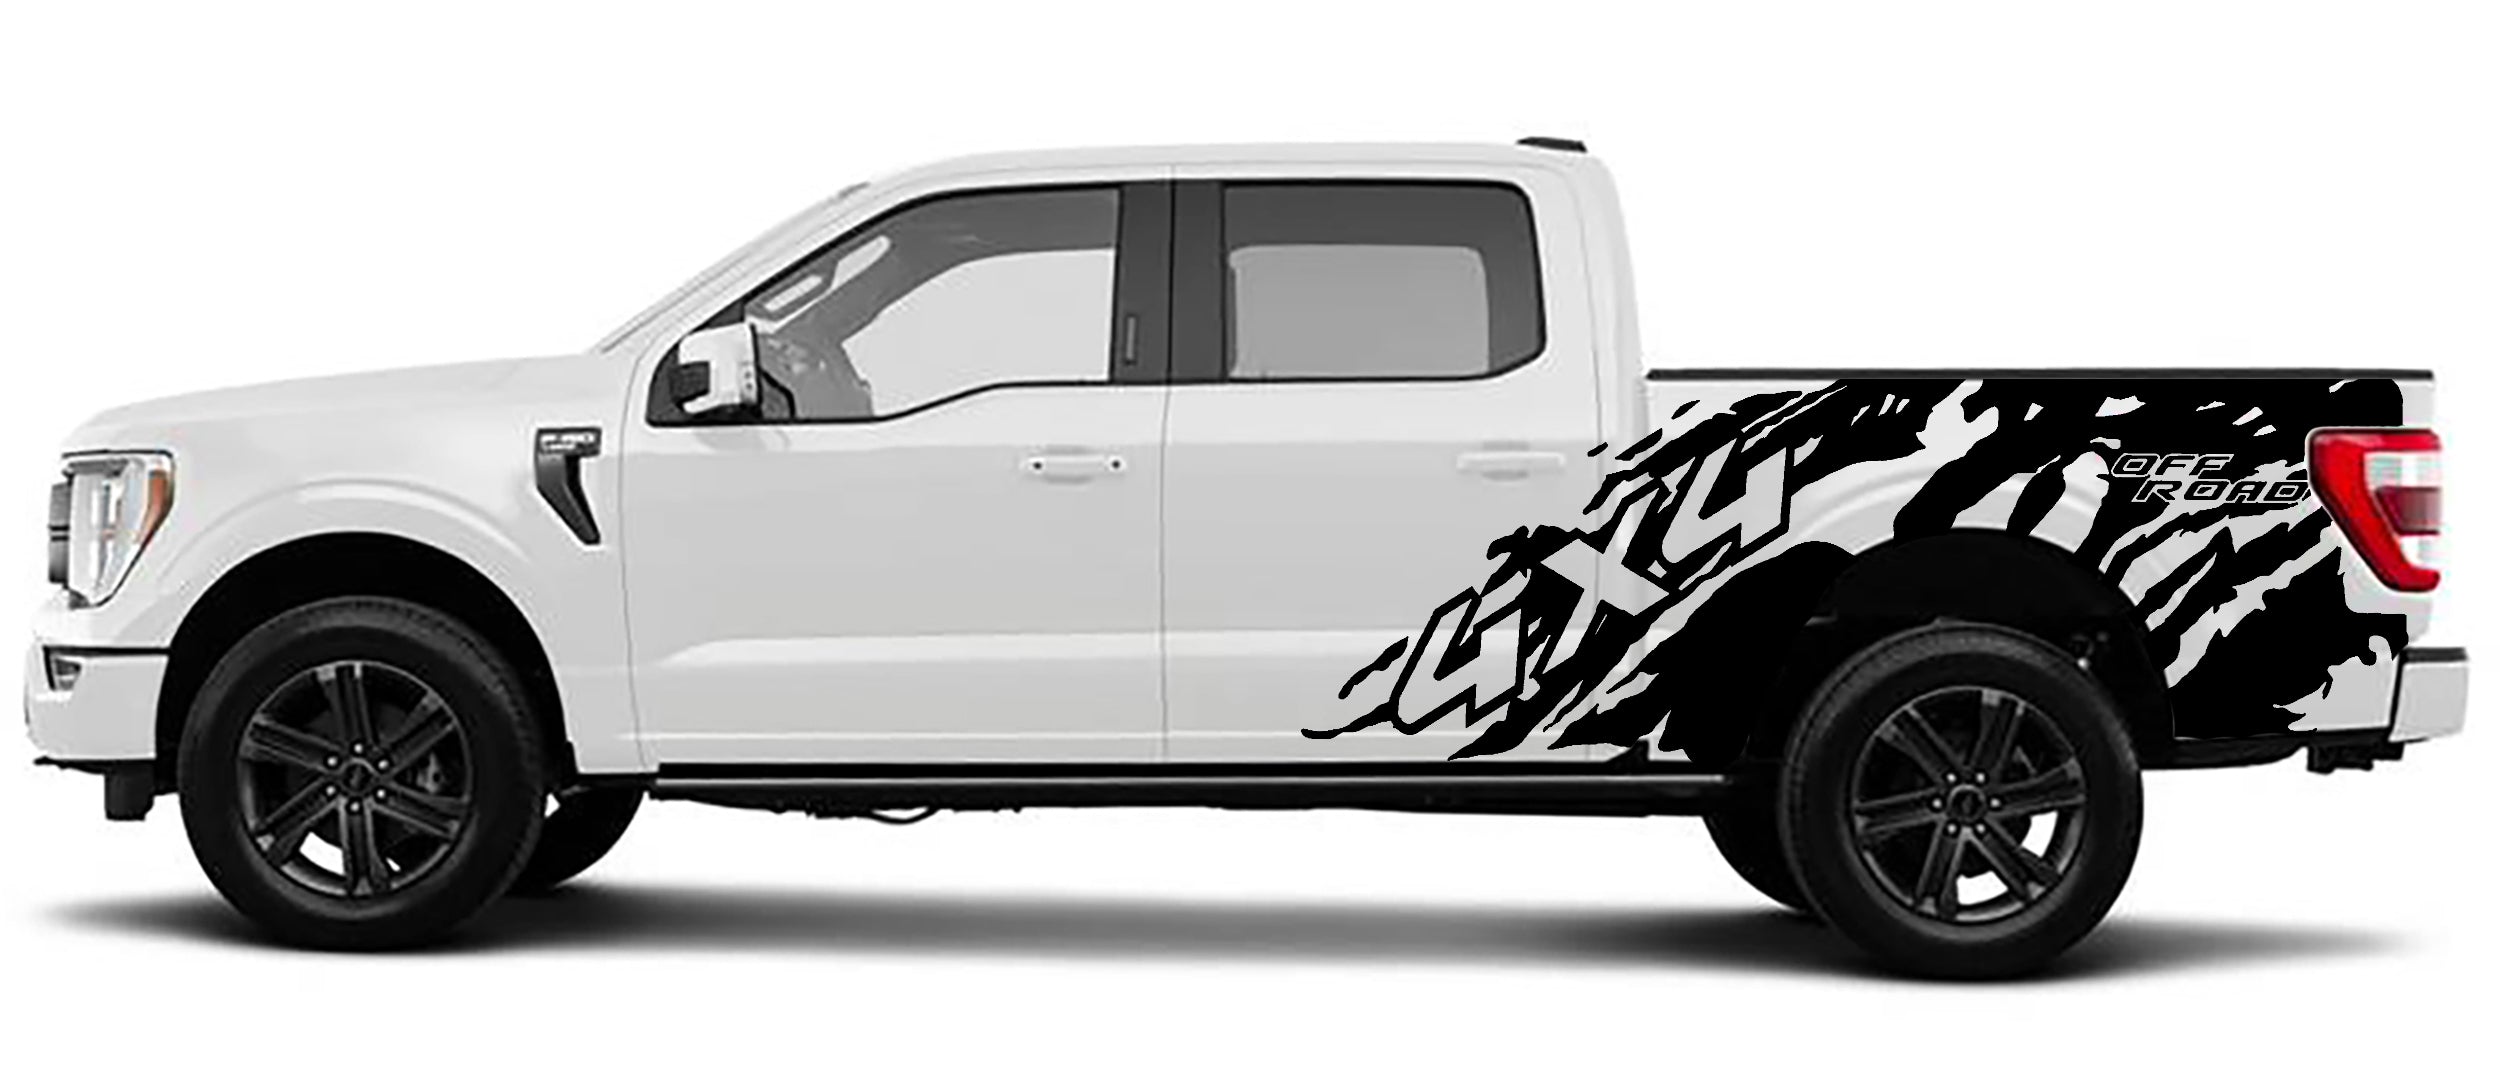 Ford F-150 4x4 Off Road Side Decals (Pair) : Vinyl Graphics Kit Fits (2021-2023)